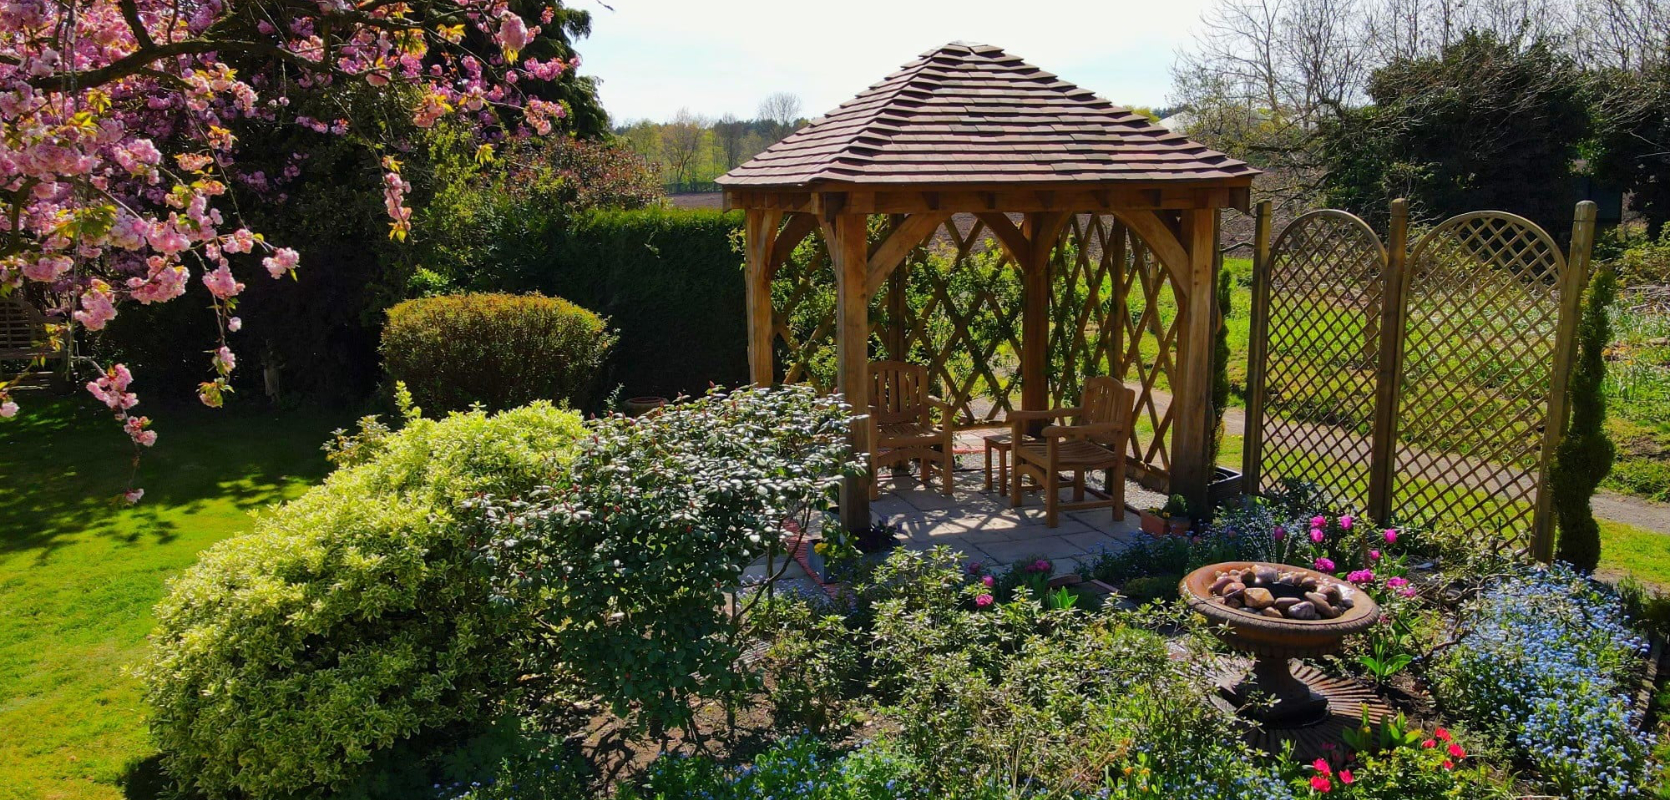 Oak gazebo situated in a garden with conifers.